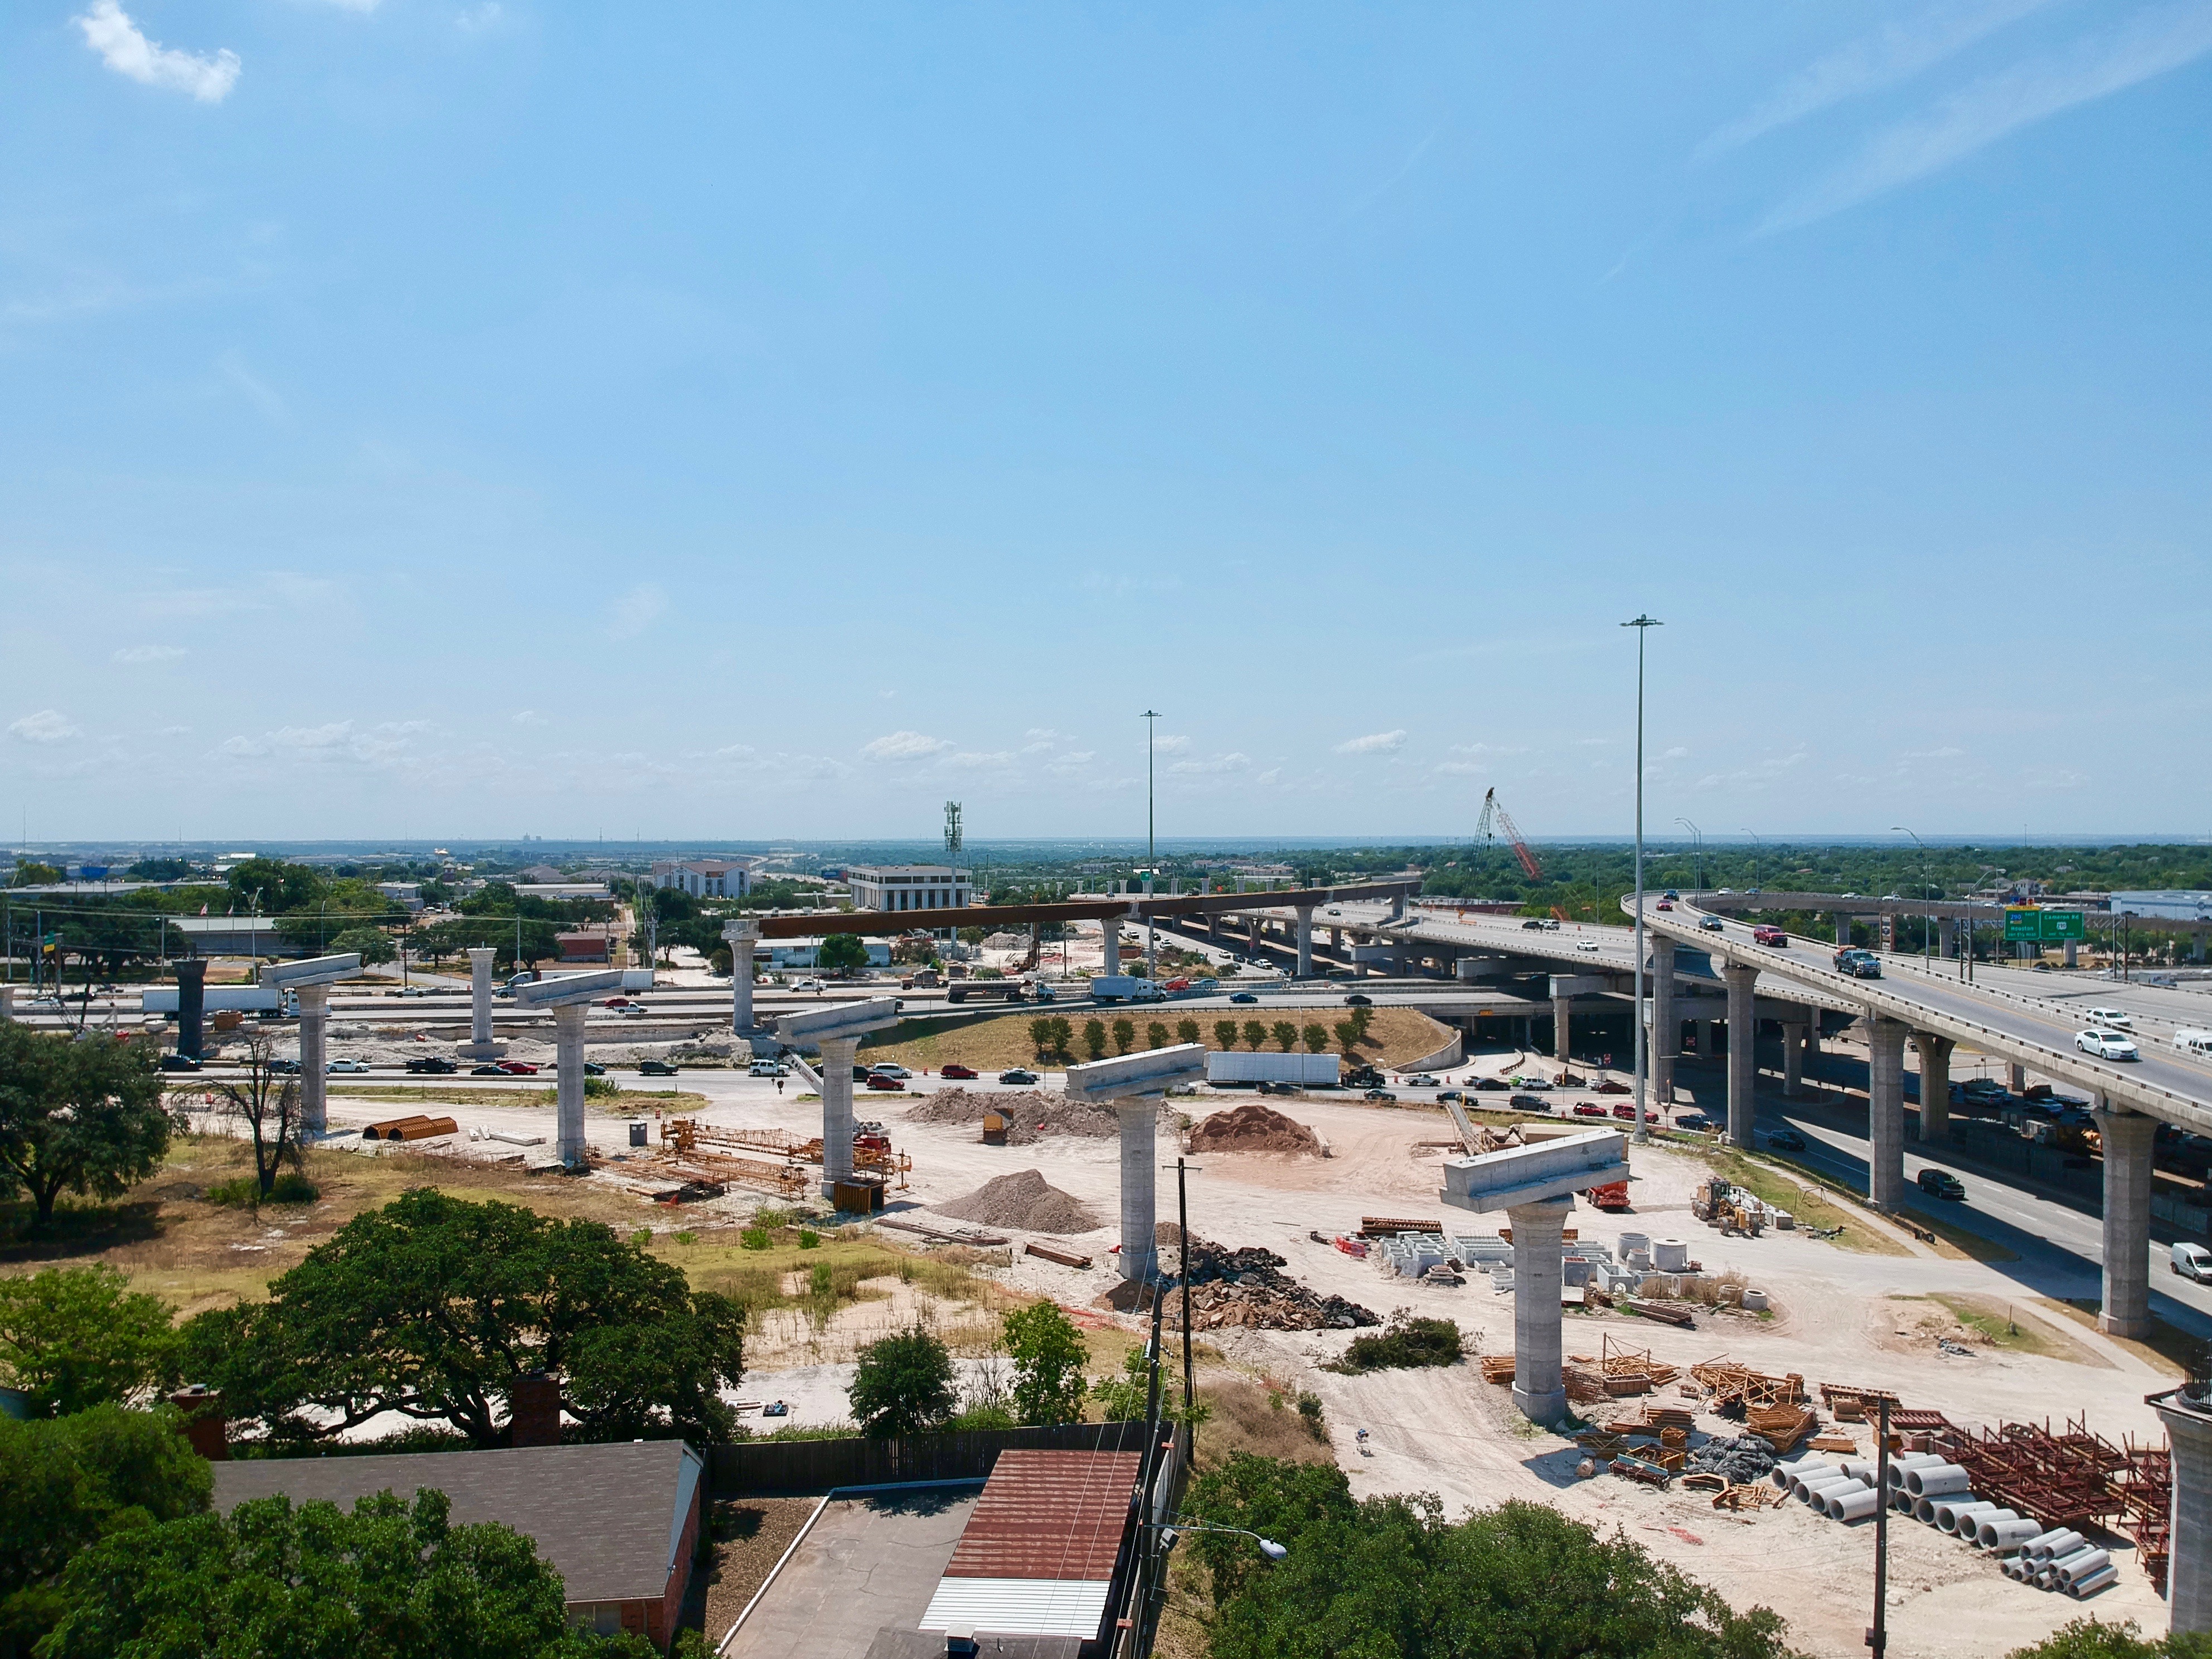 Southbound I-35 to northbound US 183 flyover progress – August 2019